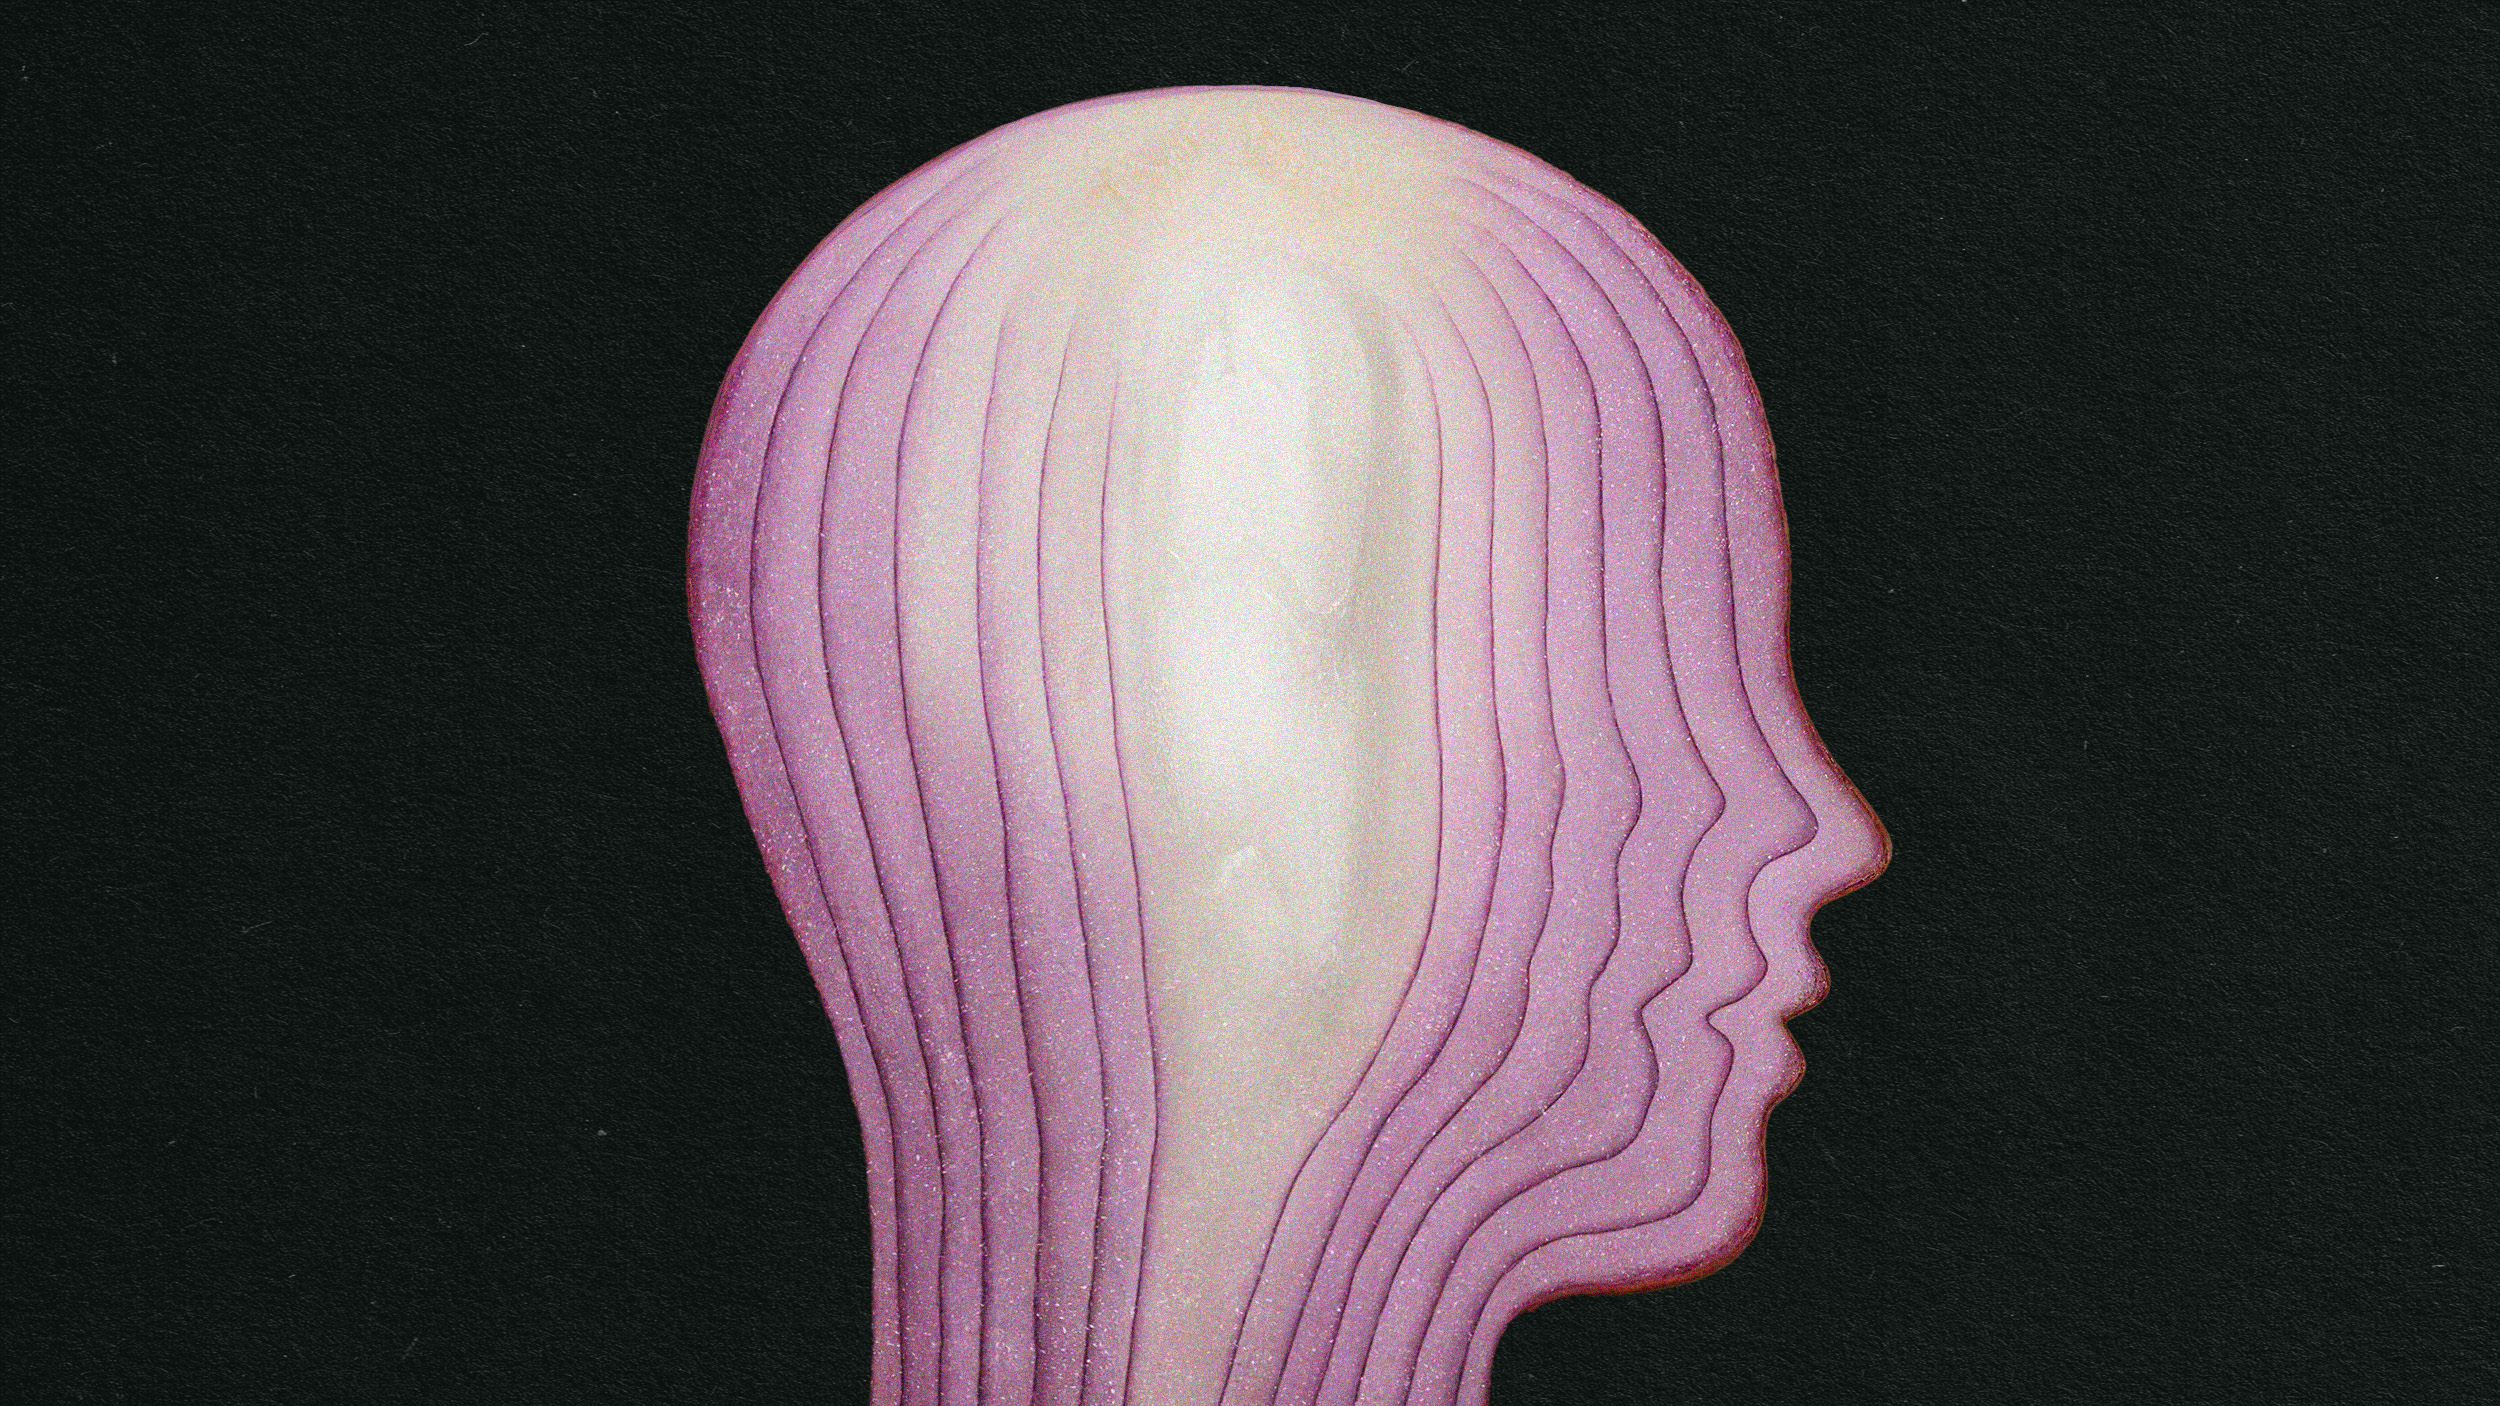 The head of an onion is shown on a black background.